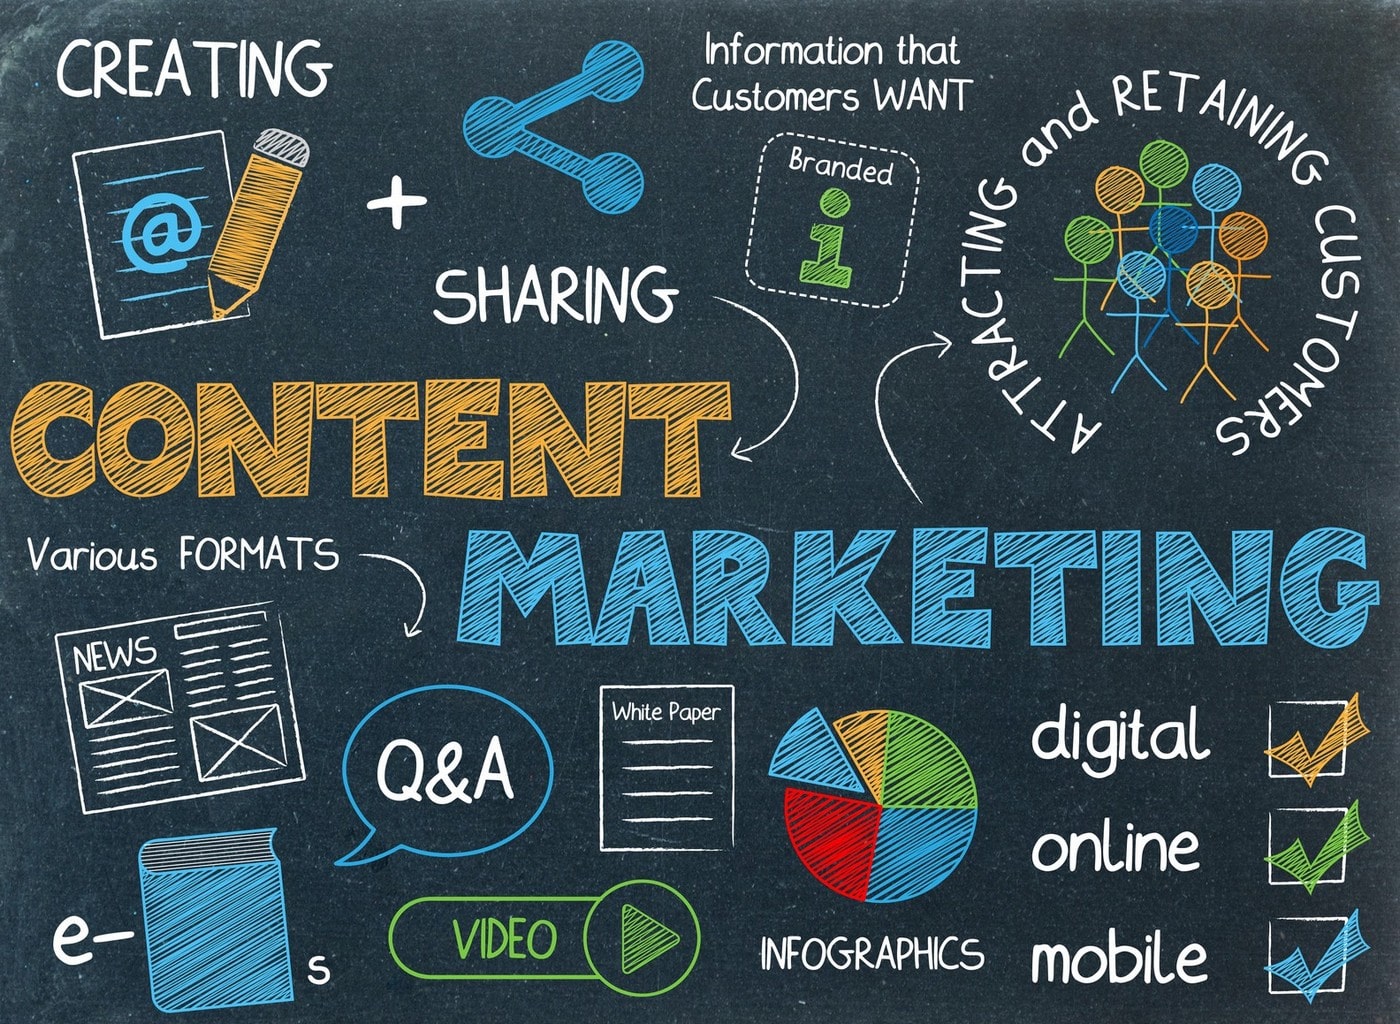 Content marketing - Tiếp thị nội dung